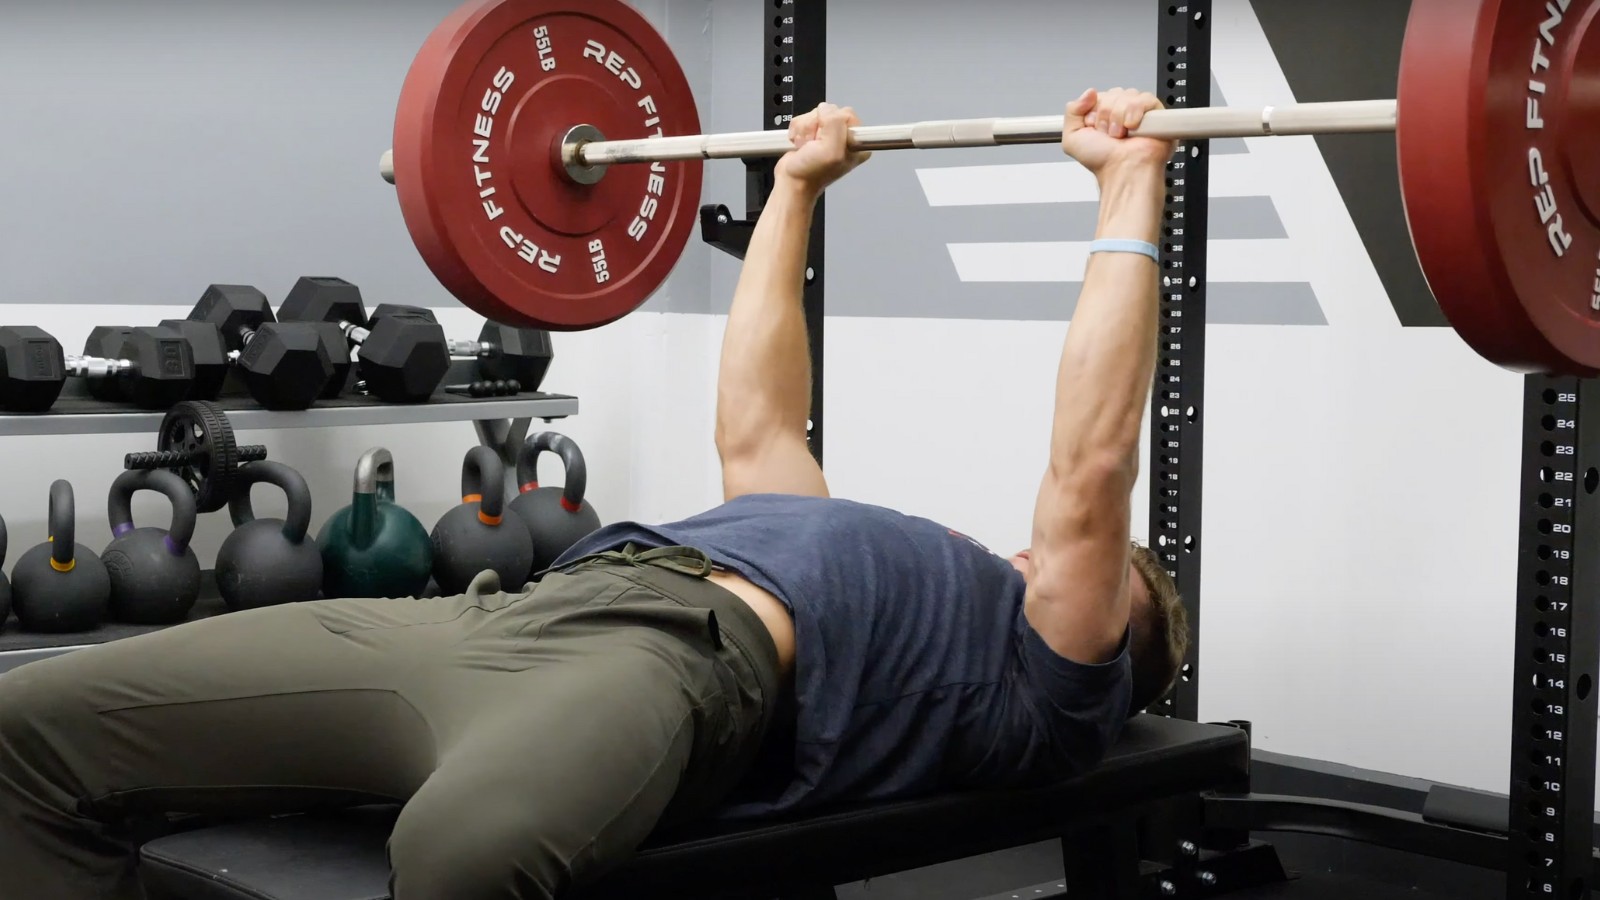 https://barbend.com/wp-content/uploads/2019/05/Barbend-Featured-Image-1600x900-A-person-doing-a-close-grip-barbell-bench-press-1.jpg